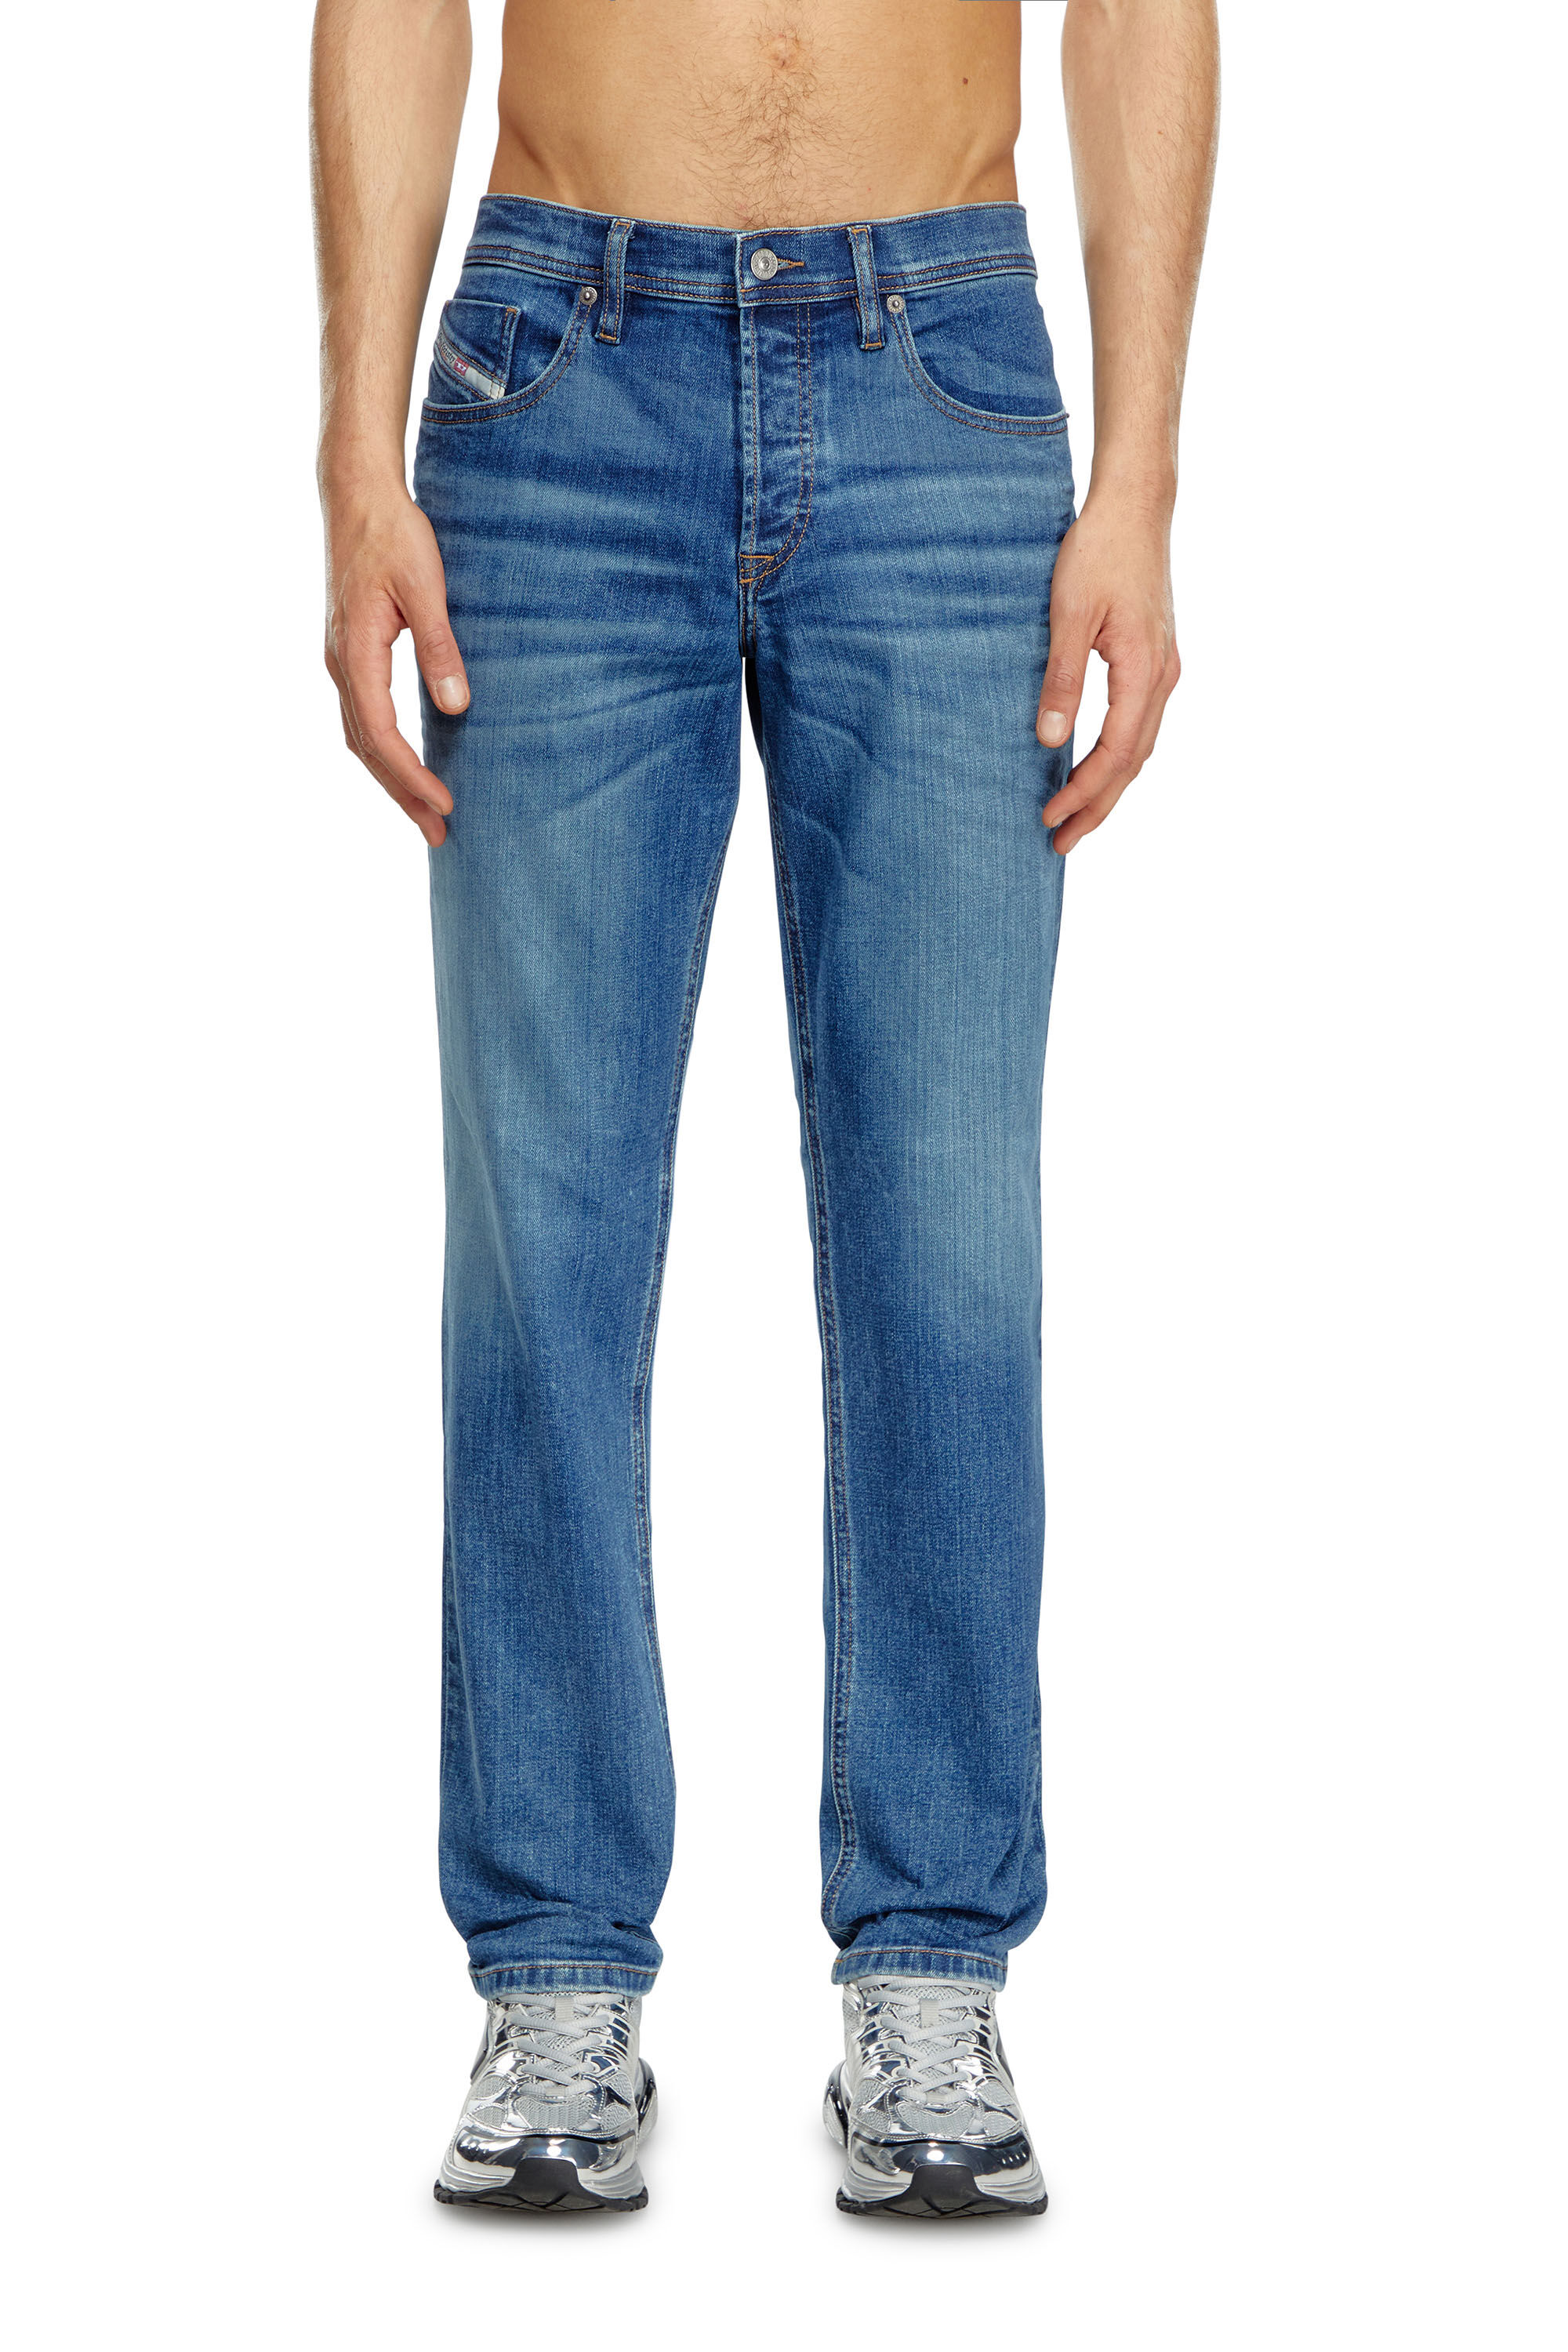 Diesel - Tapered Jeans 2023 D-Finitive 0GRDP, Hombre Tapered Jeans - 2023 D-Finitive in Azul marino - Image 3